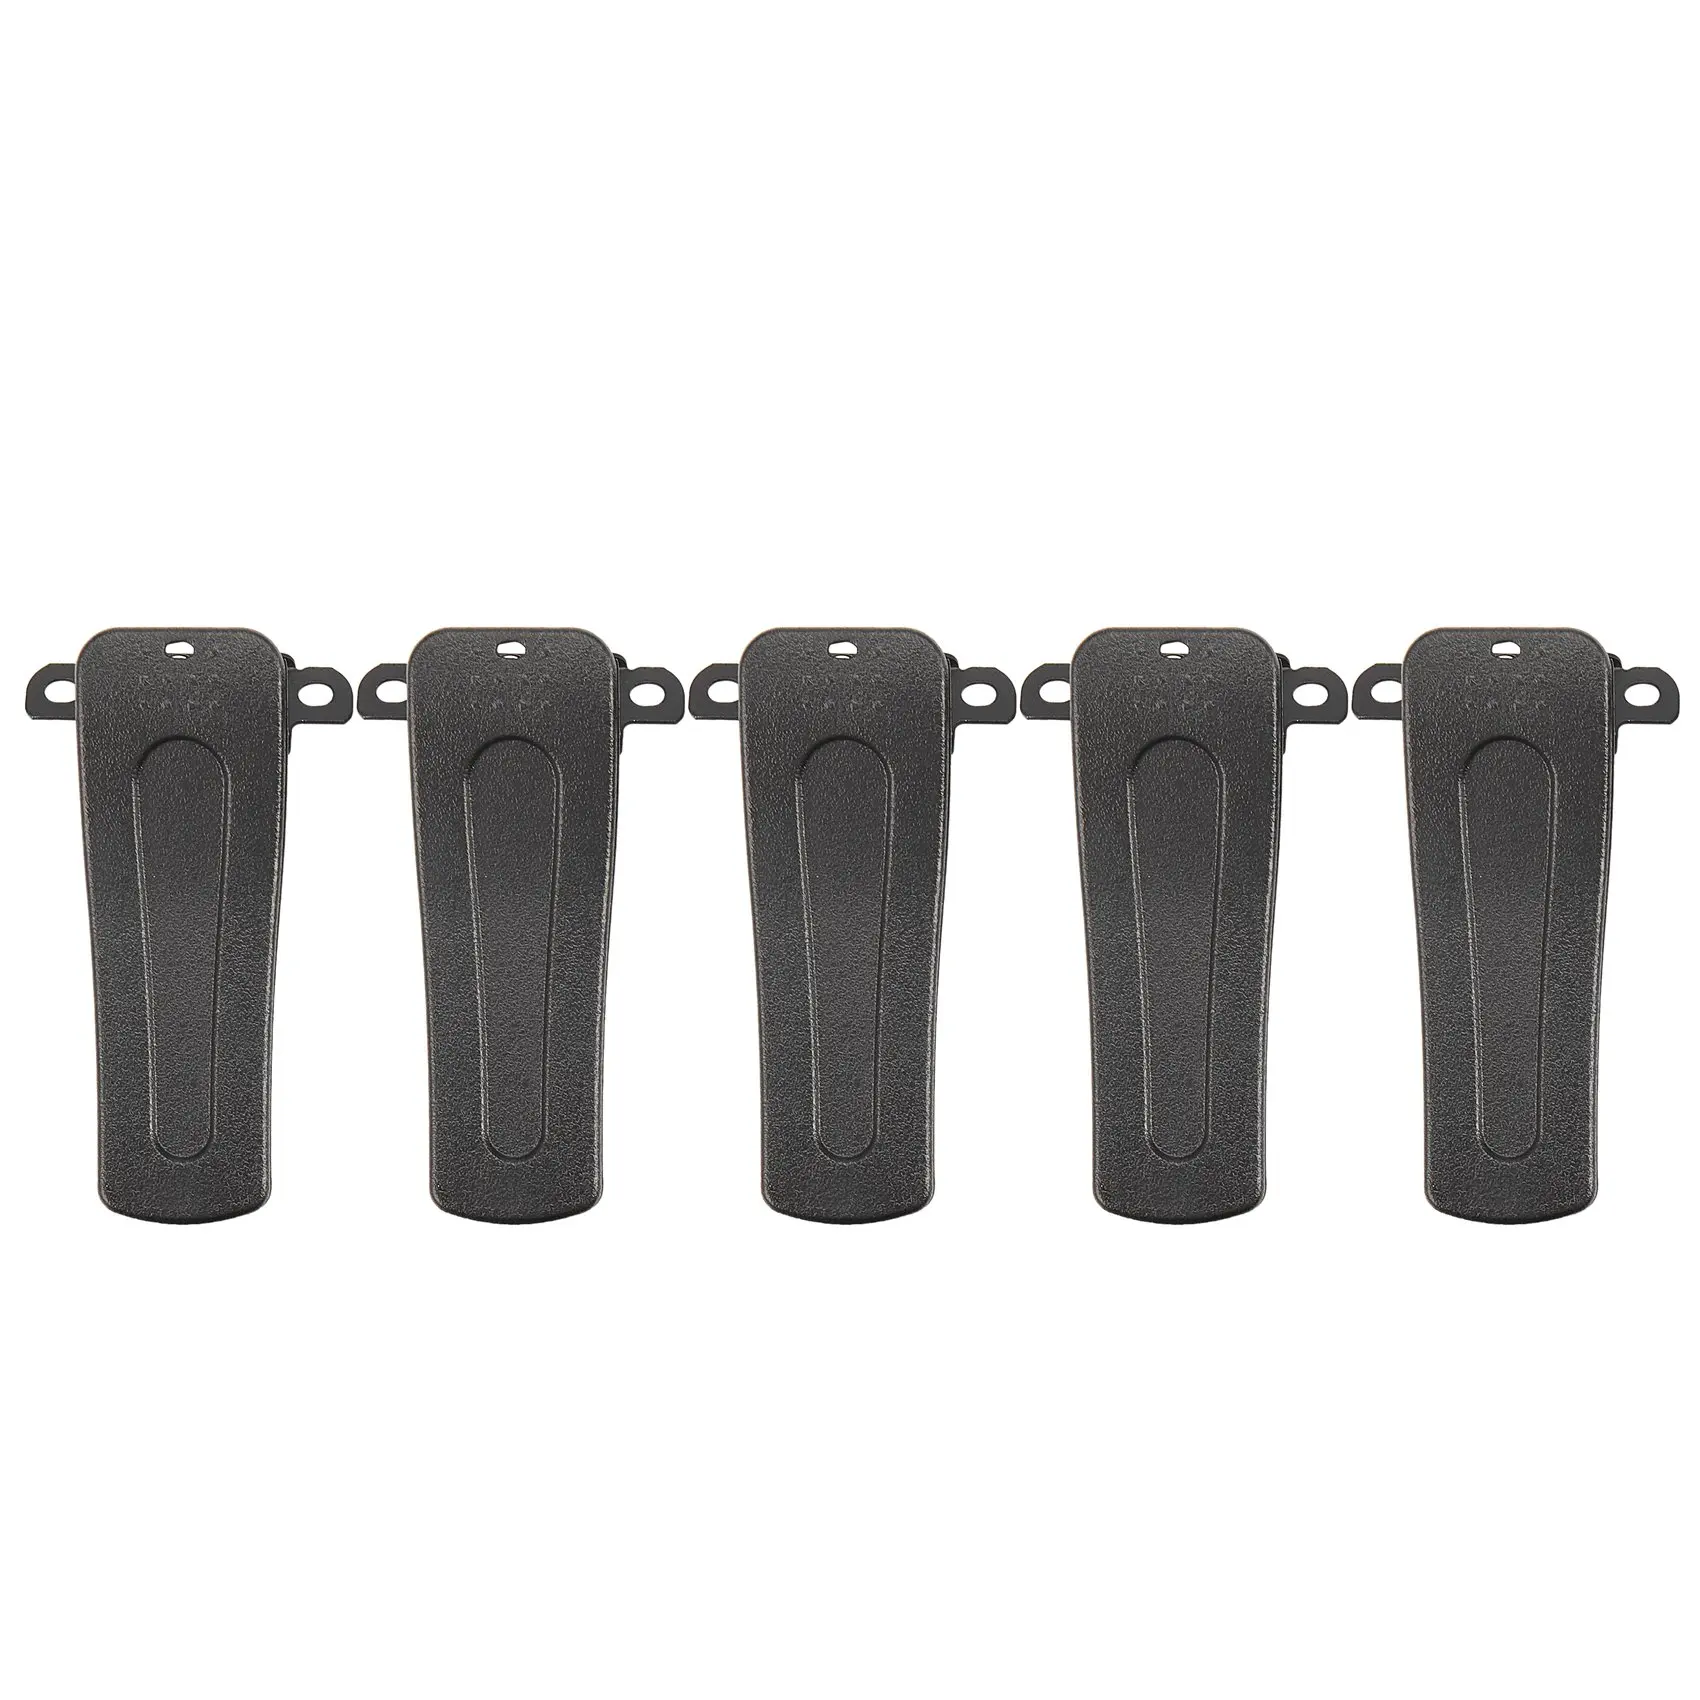 

5PCS Belt Clip for H777 Hot Model Baofeng Radio BF-666S BF-777S BF-888S 666S 777S 888S Walkie Talkie Accessories clamps Black